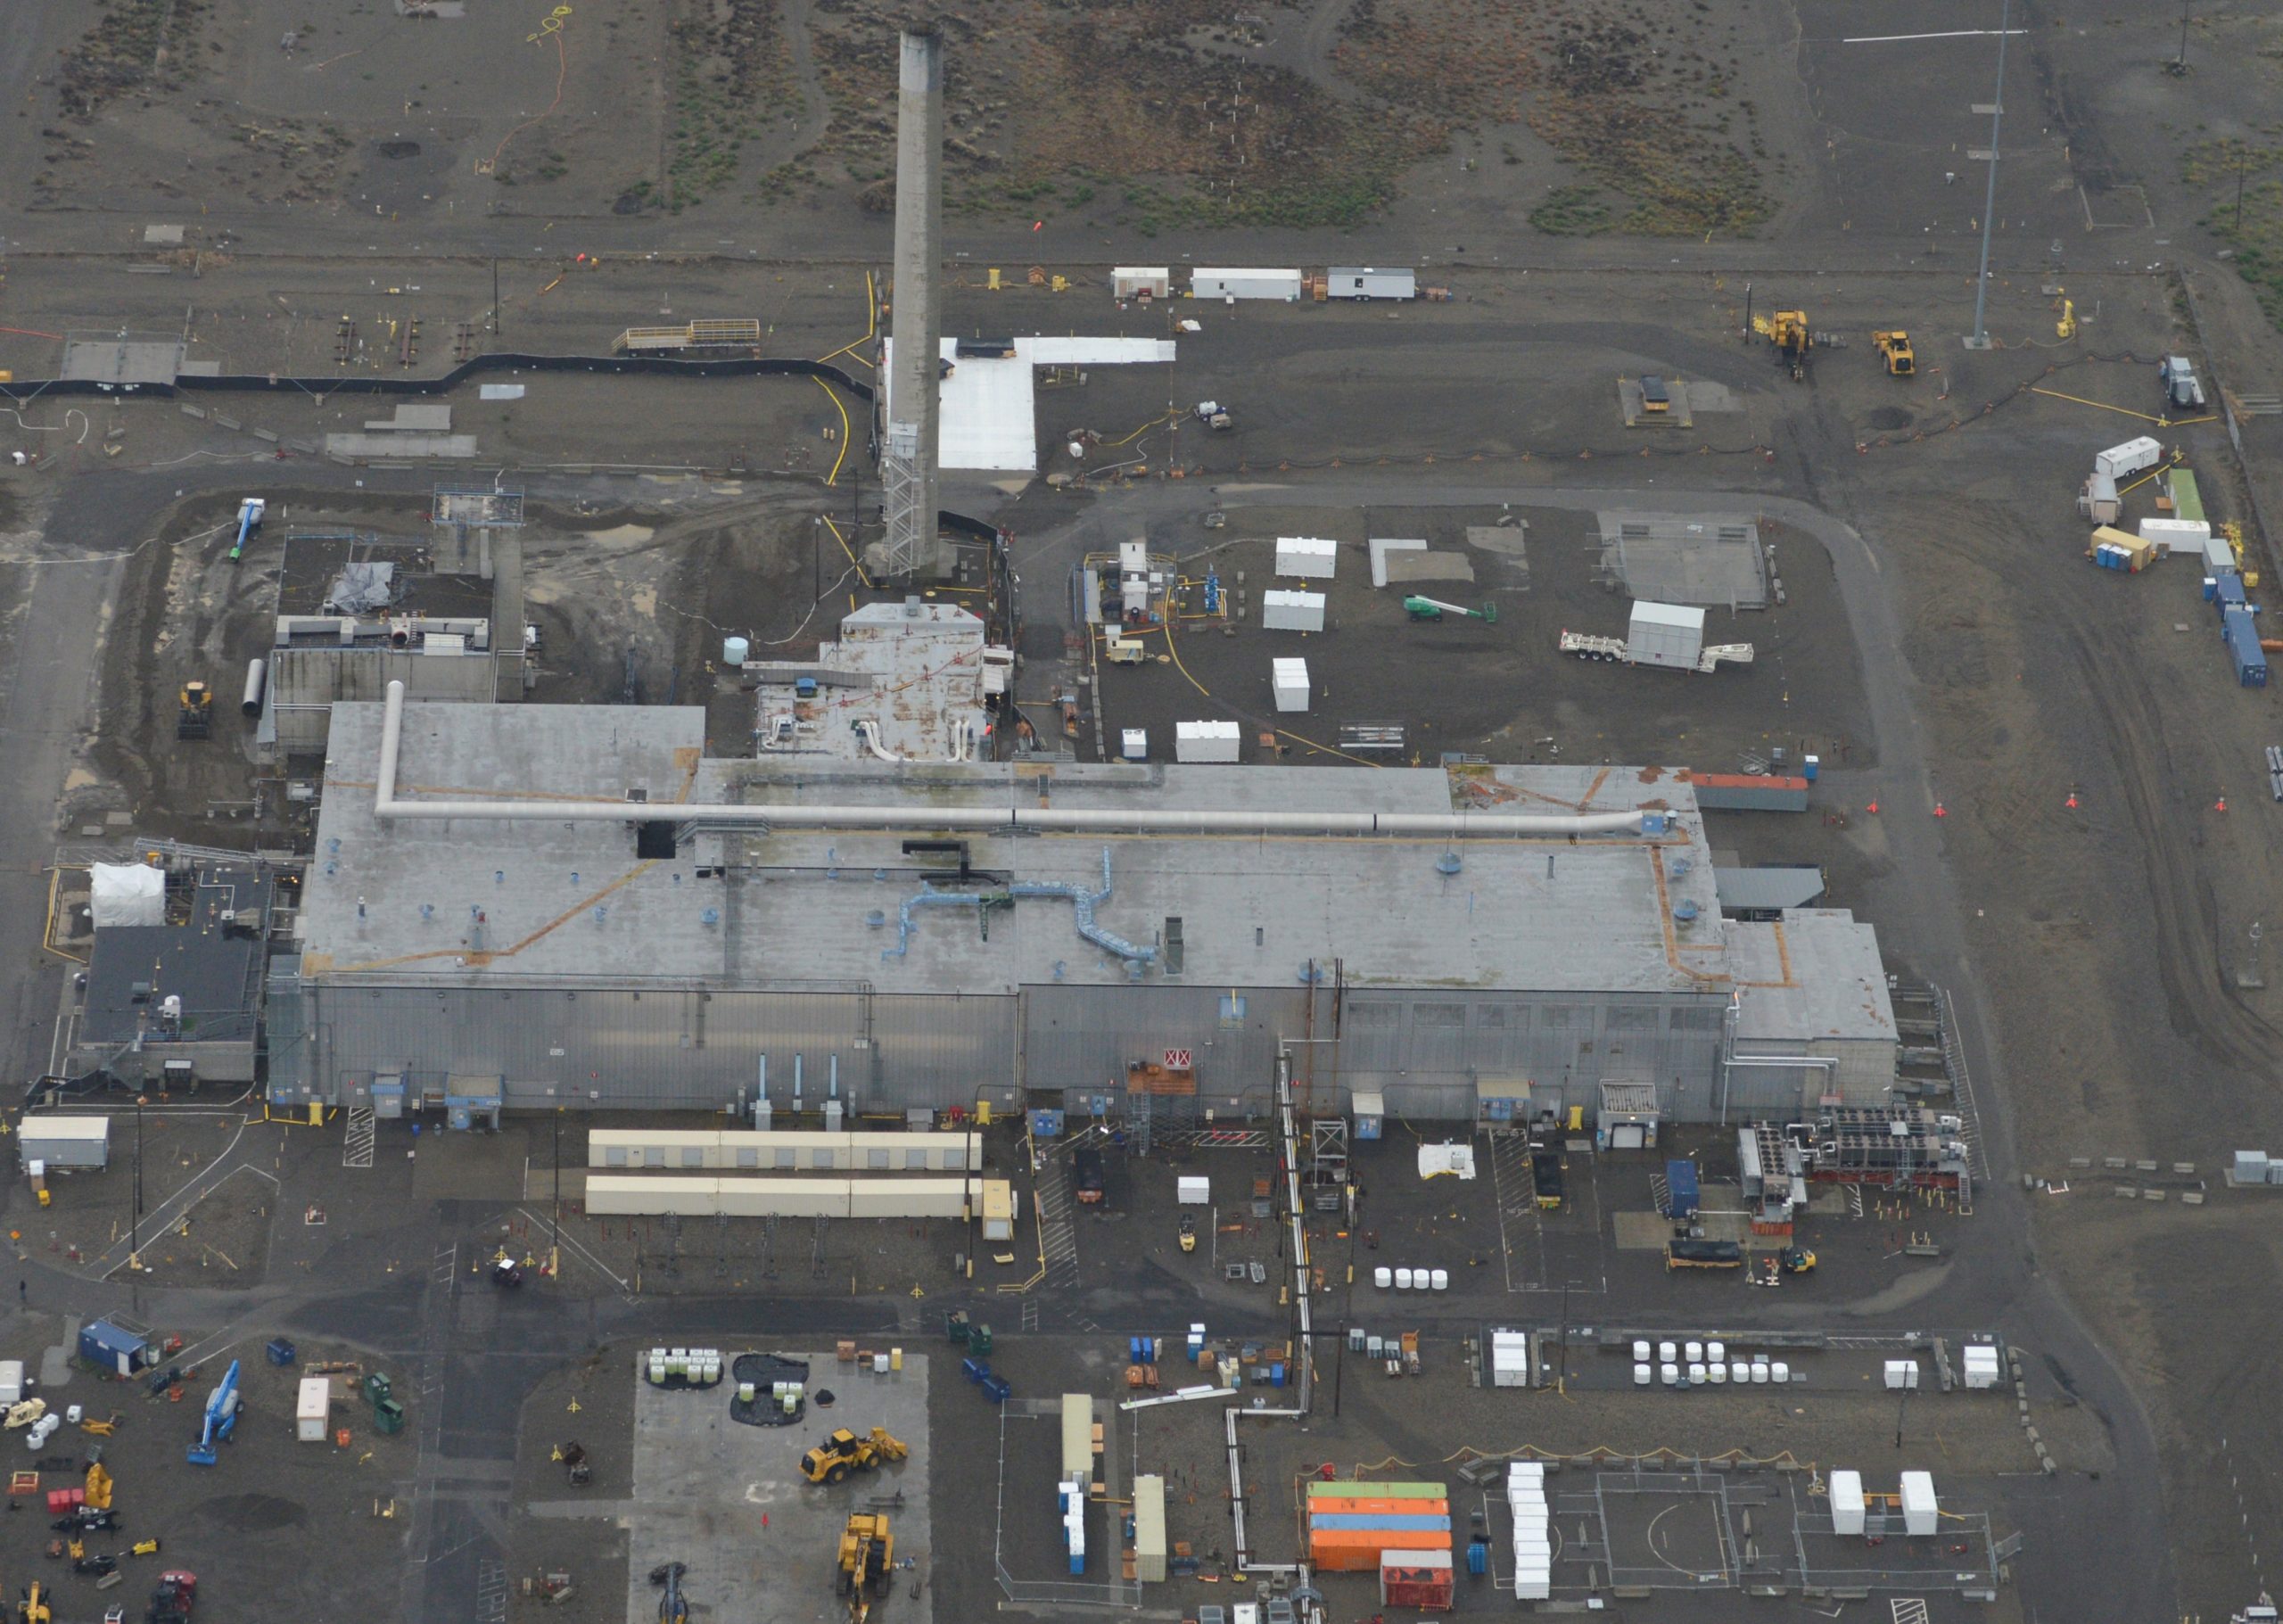 Hanford's shuttered Plutonium Finishing Plant has not produced its titular plutoium "buttons" since it closed in 1989, but crews just finished the main demolition. CREDIT: CH2M Hill Plateau Remediation Company